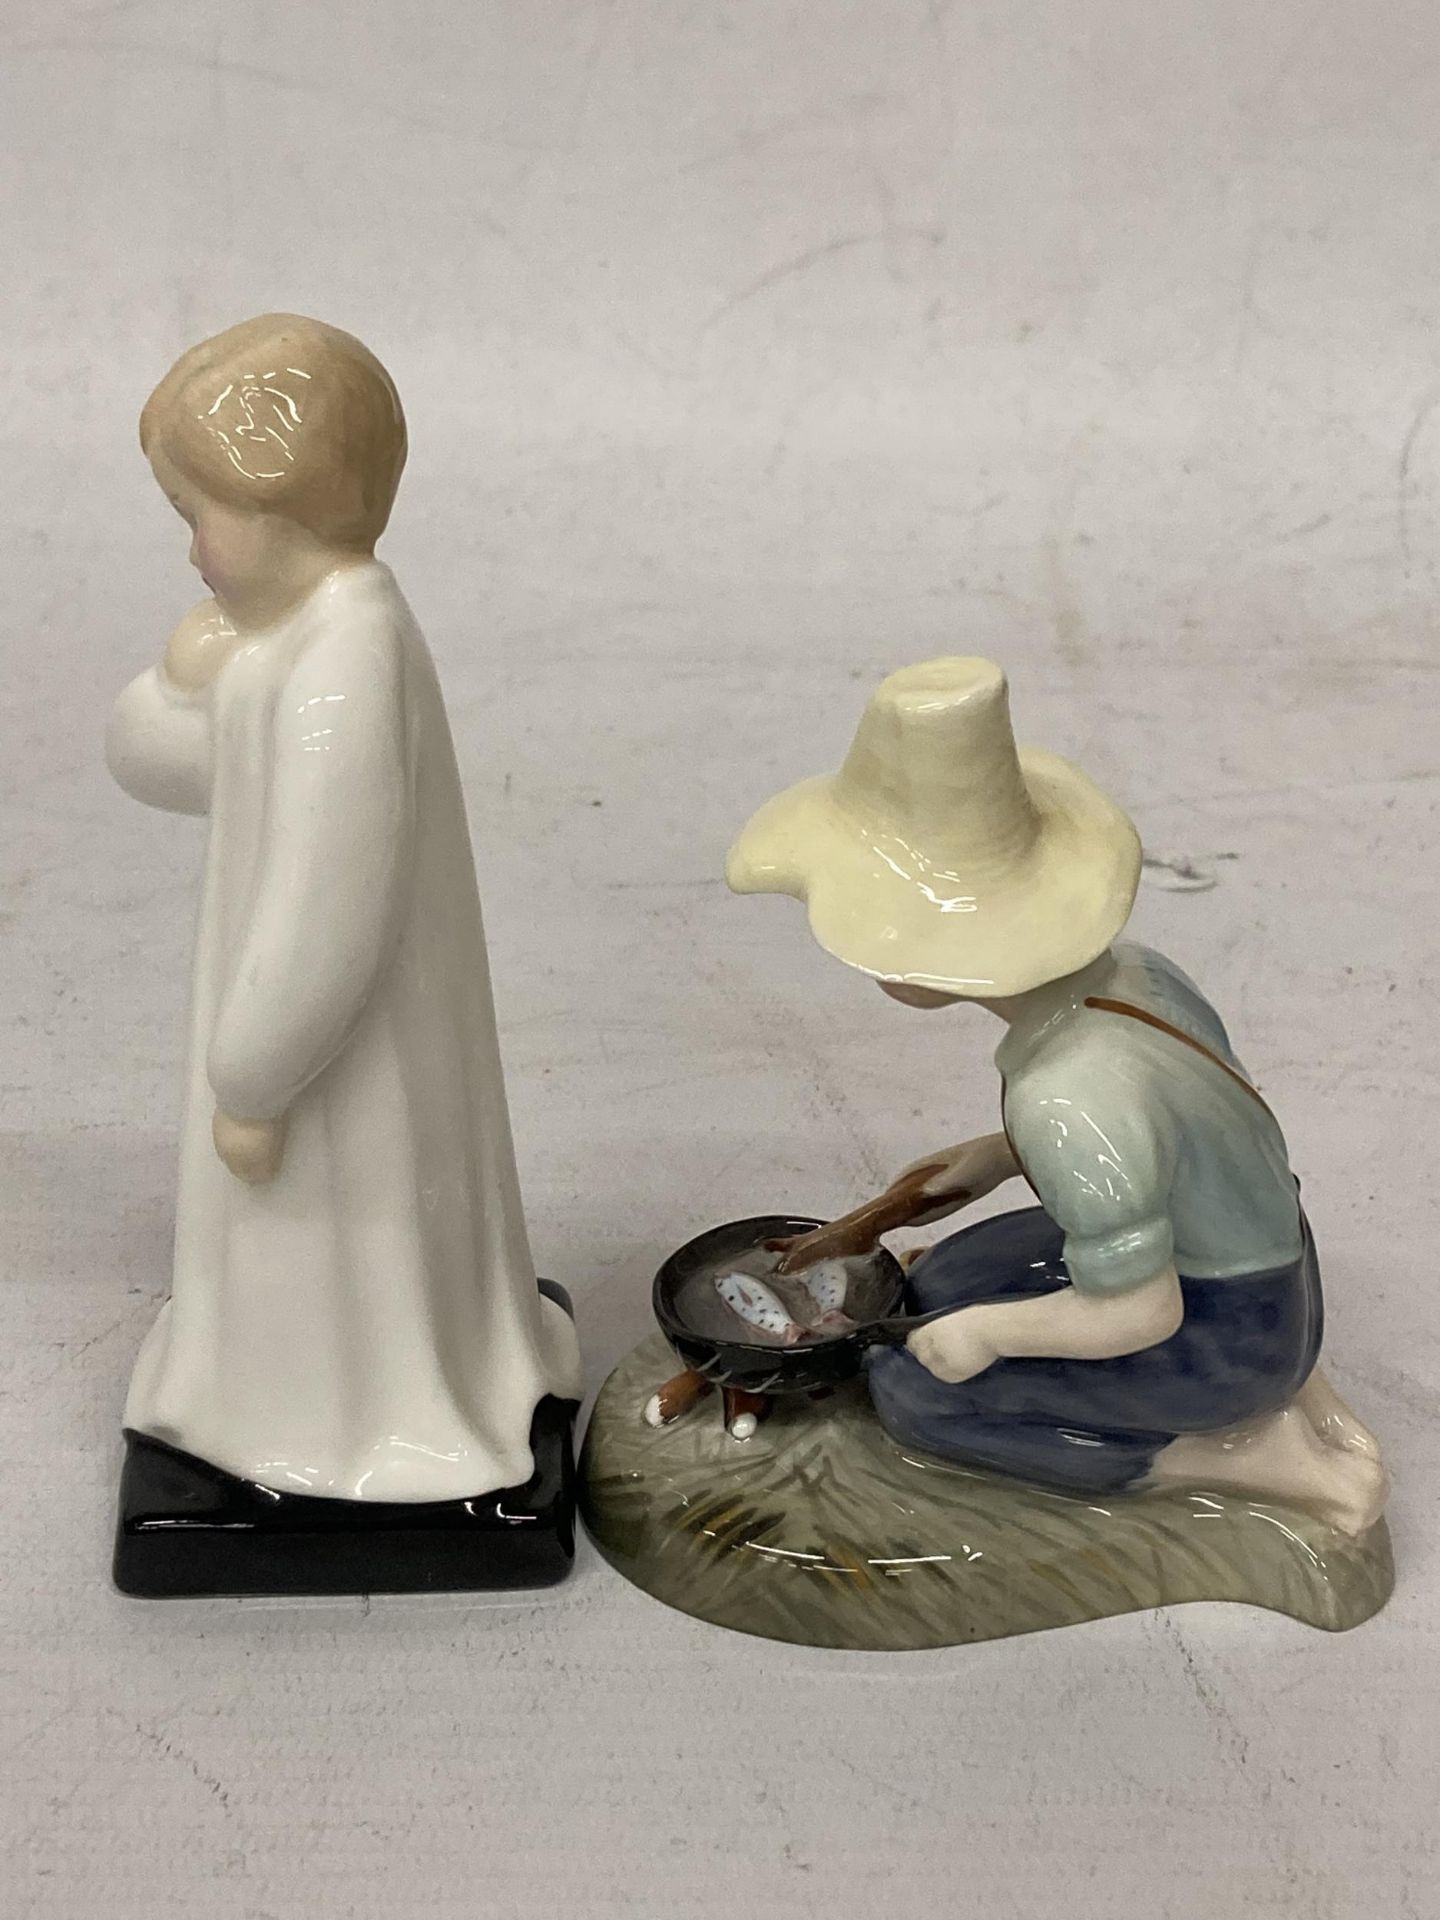 TWO ROYAL DOULTON FIGURES "RIVER BOY" HN 2128 AND"DARLING" HN 1985 - Image 4 of 4